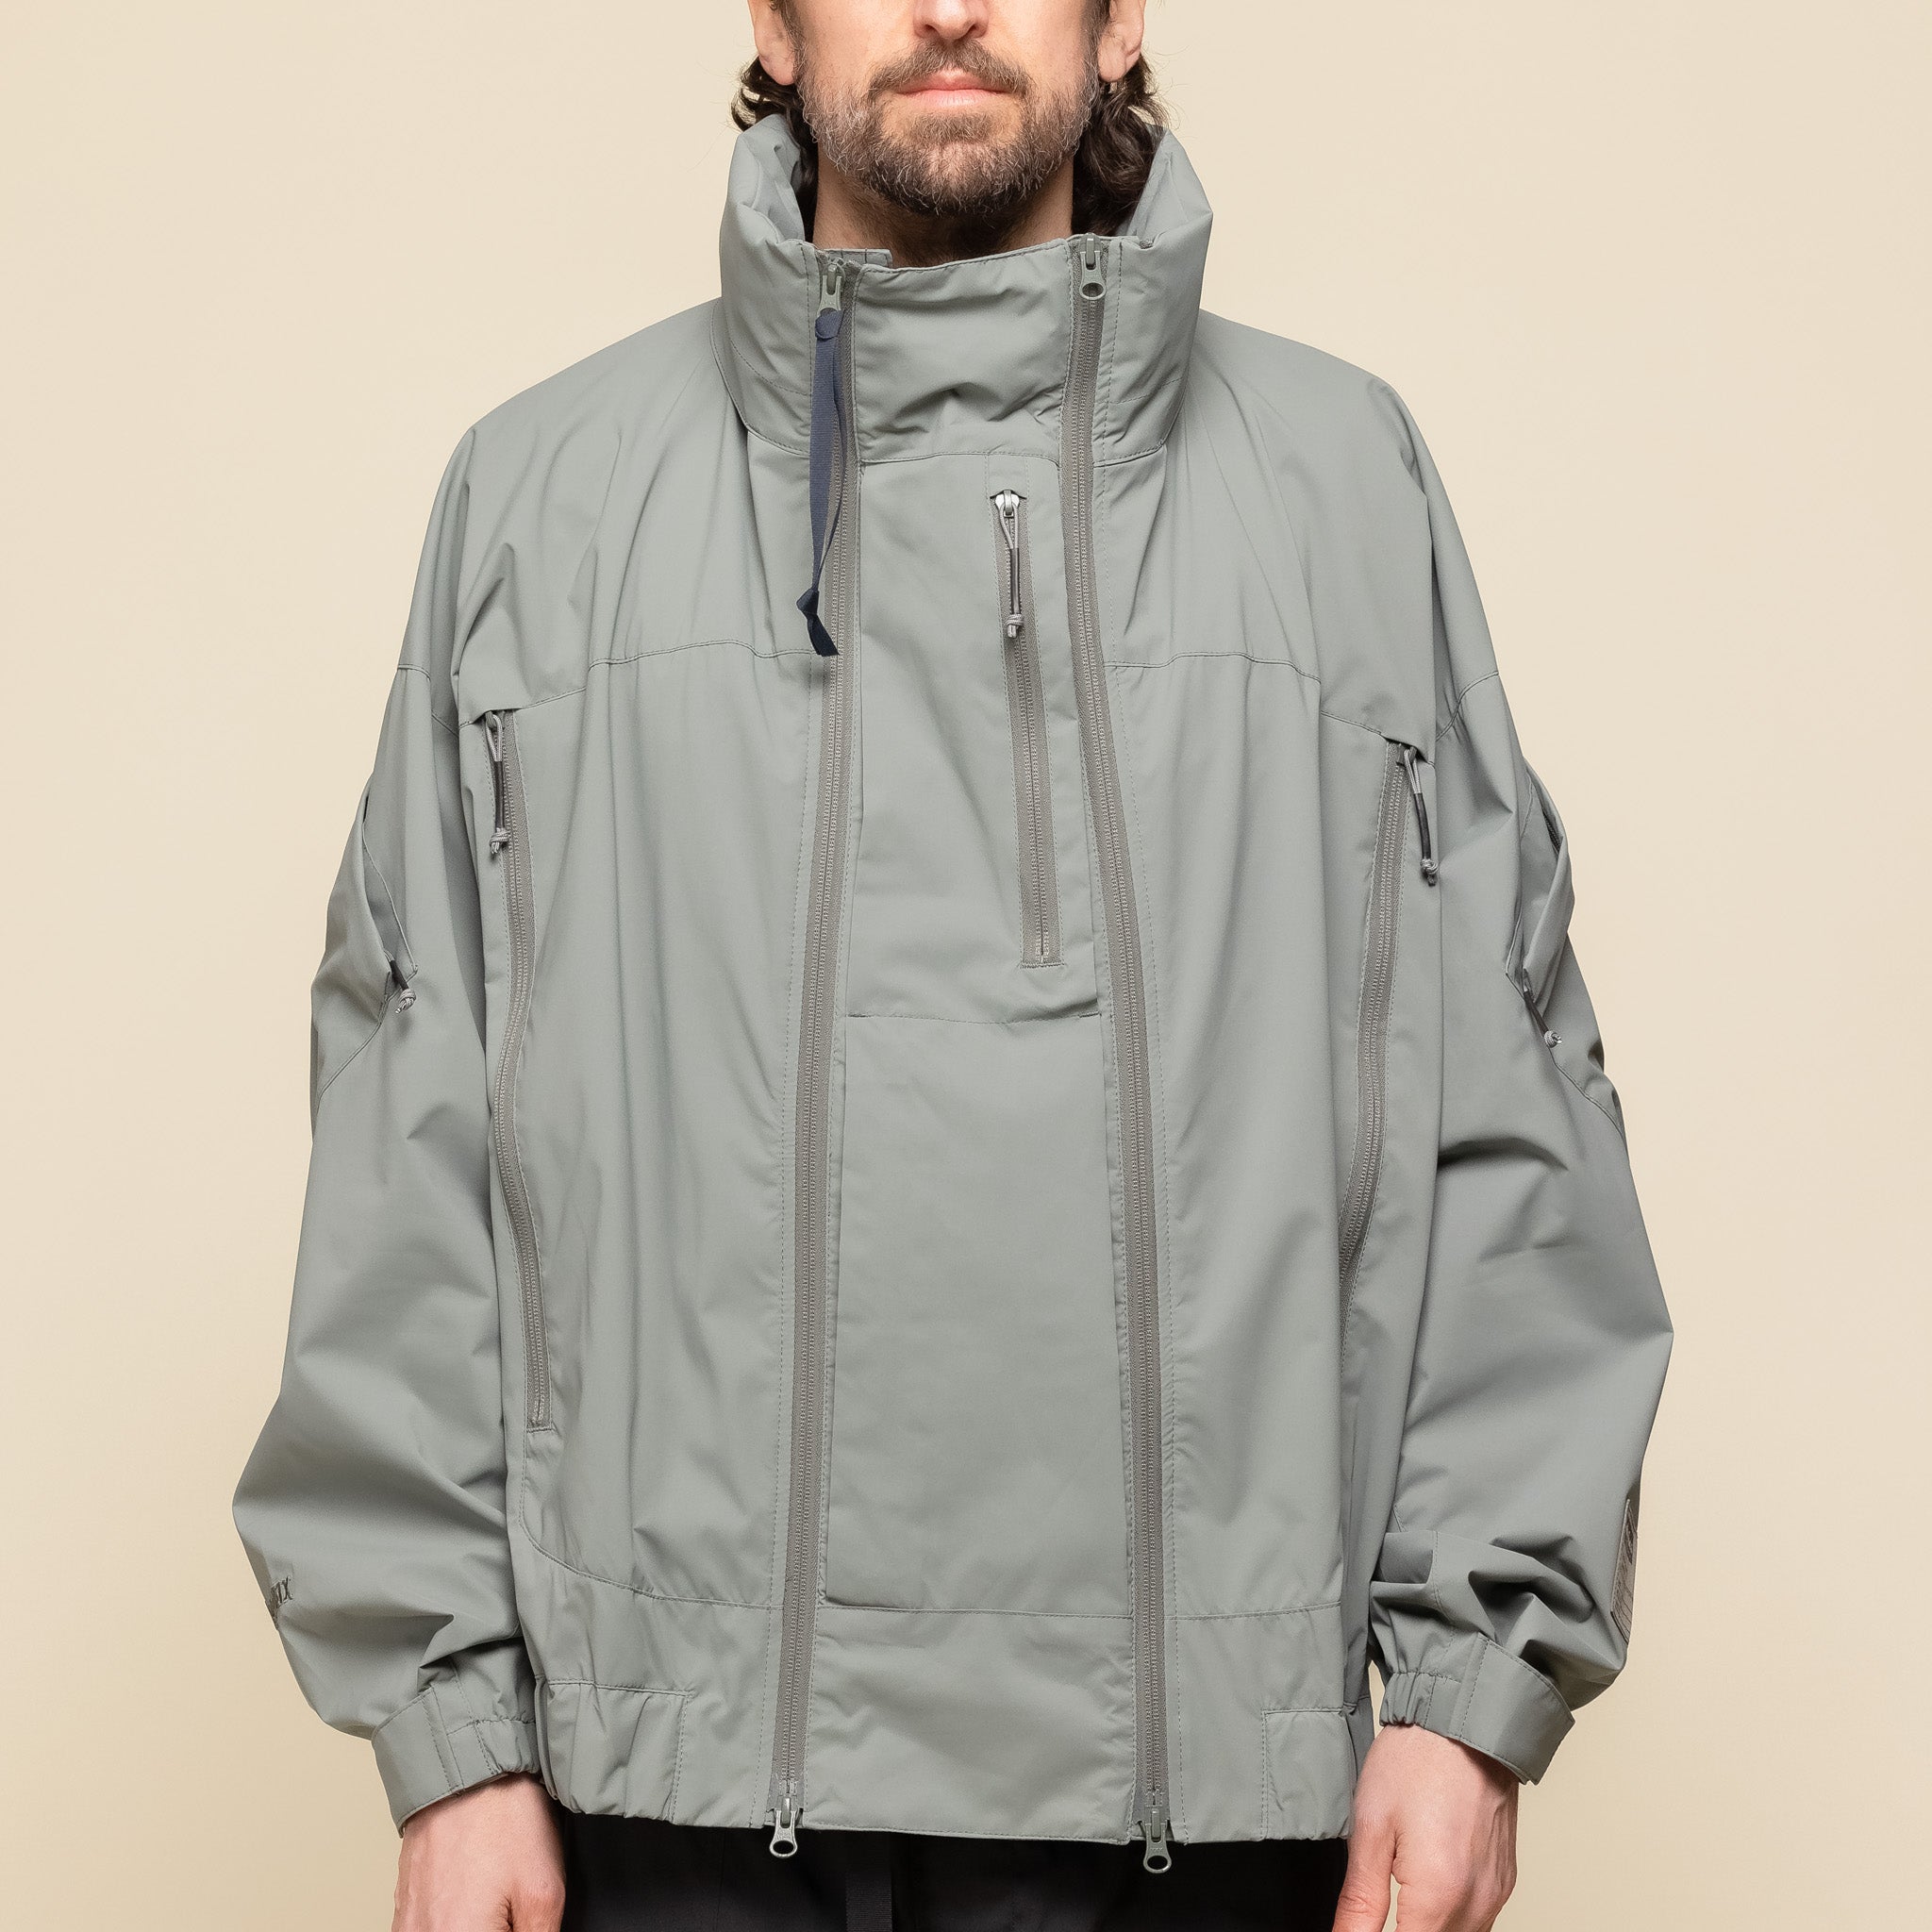 Poliquant - Protected Common Uniform Hooded Jacket - Grey Green "poliquant stockists" "poliquant website" "poliquant jacket"